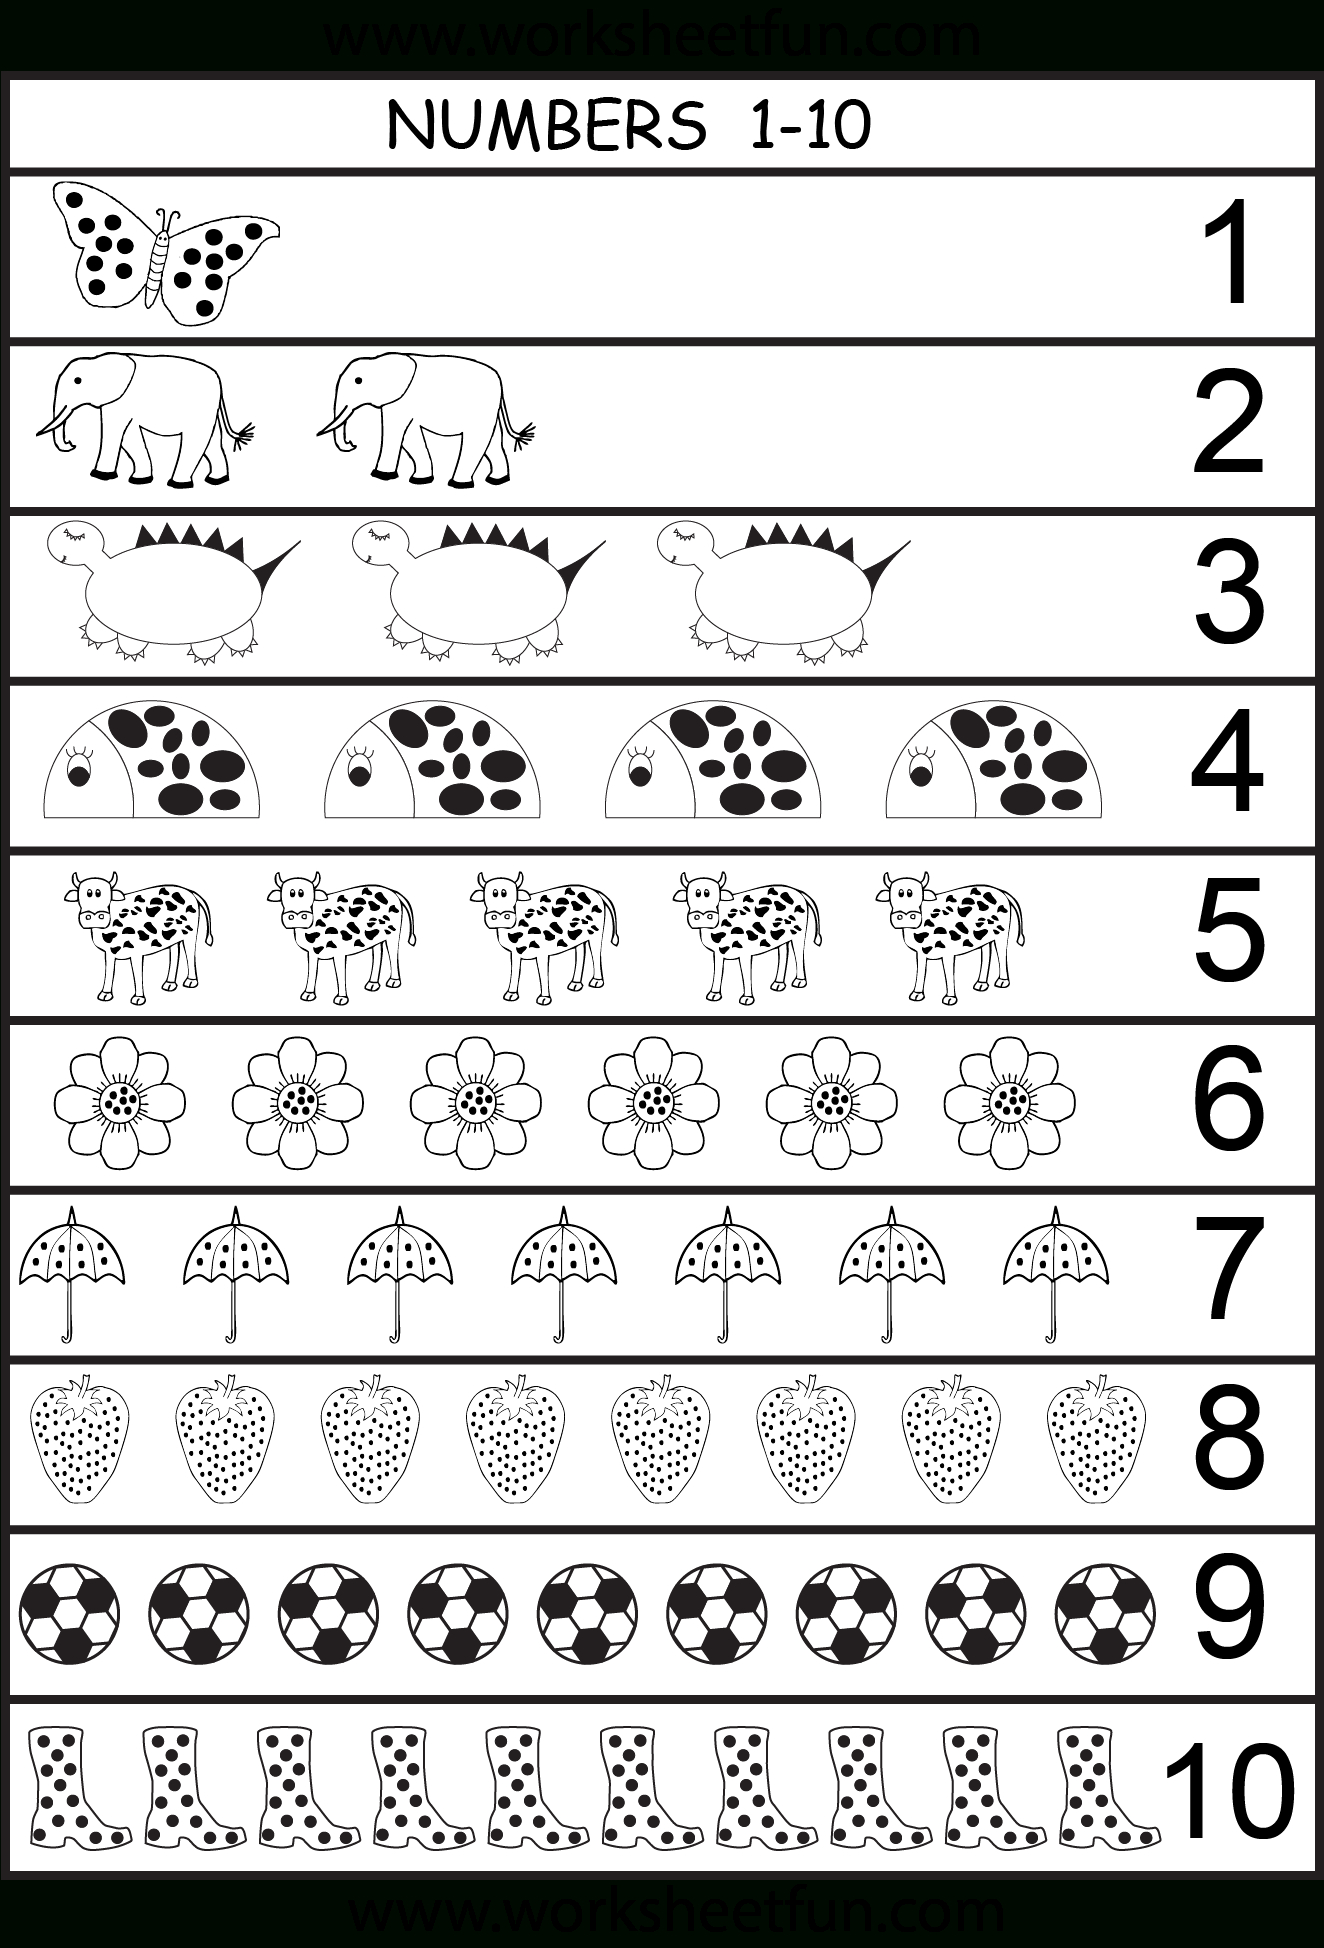 Number Chart 1-10 | Projects To Try | Pinterest | Preschool - Free Printable Number Chart 1 10